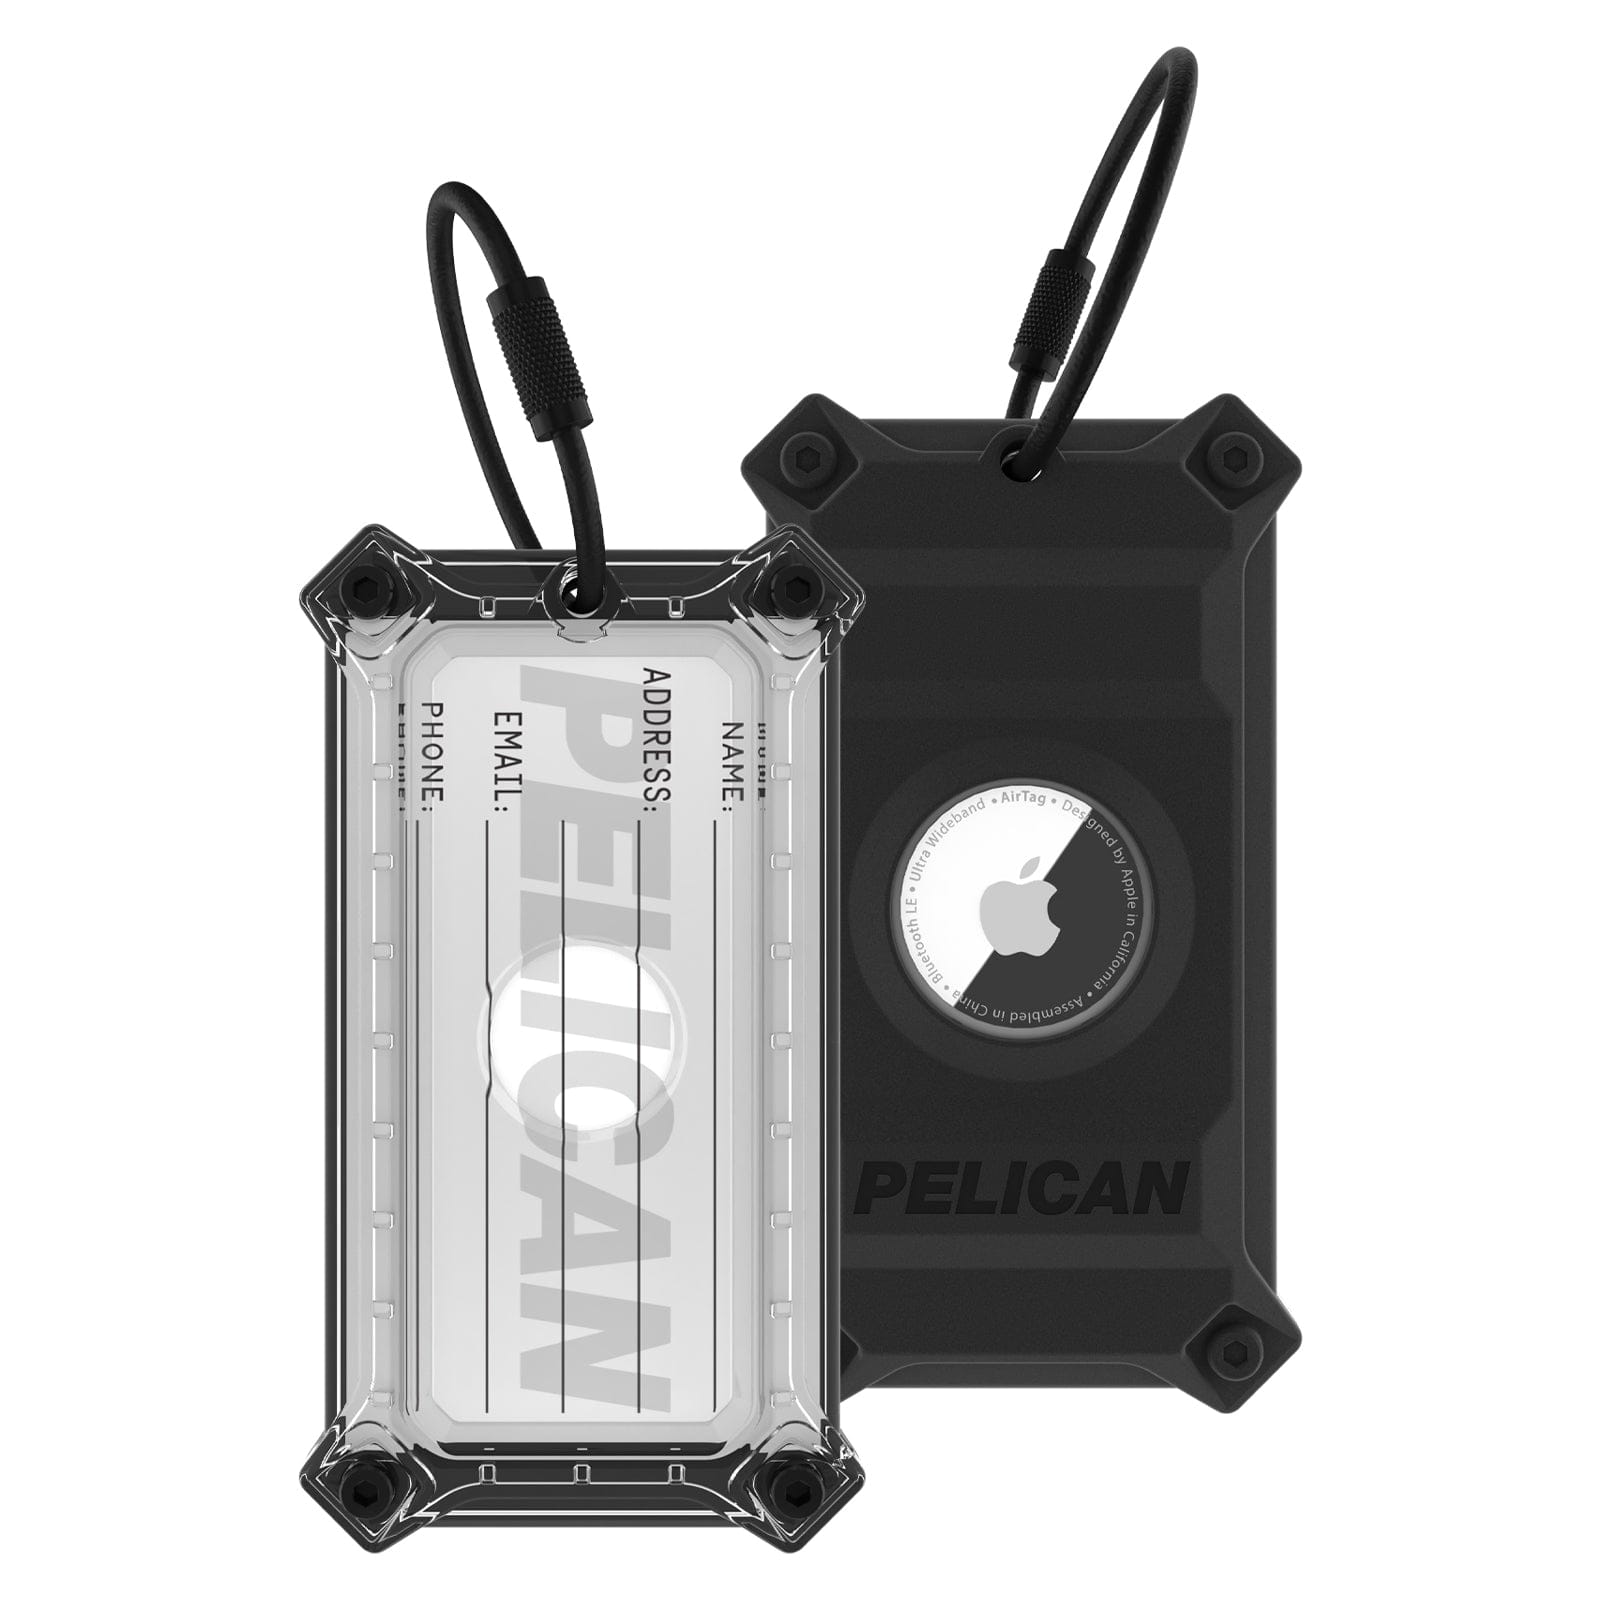 Pelican Protector Luggage Tag for AirTags - AirTag Case